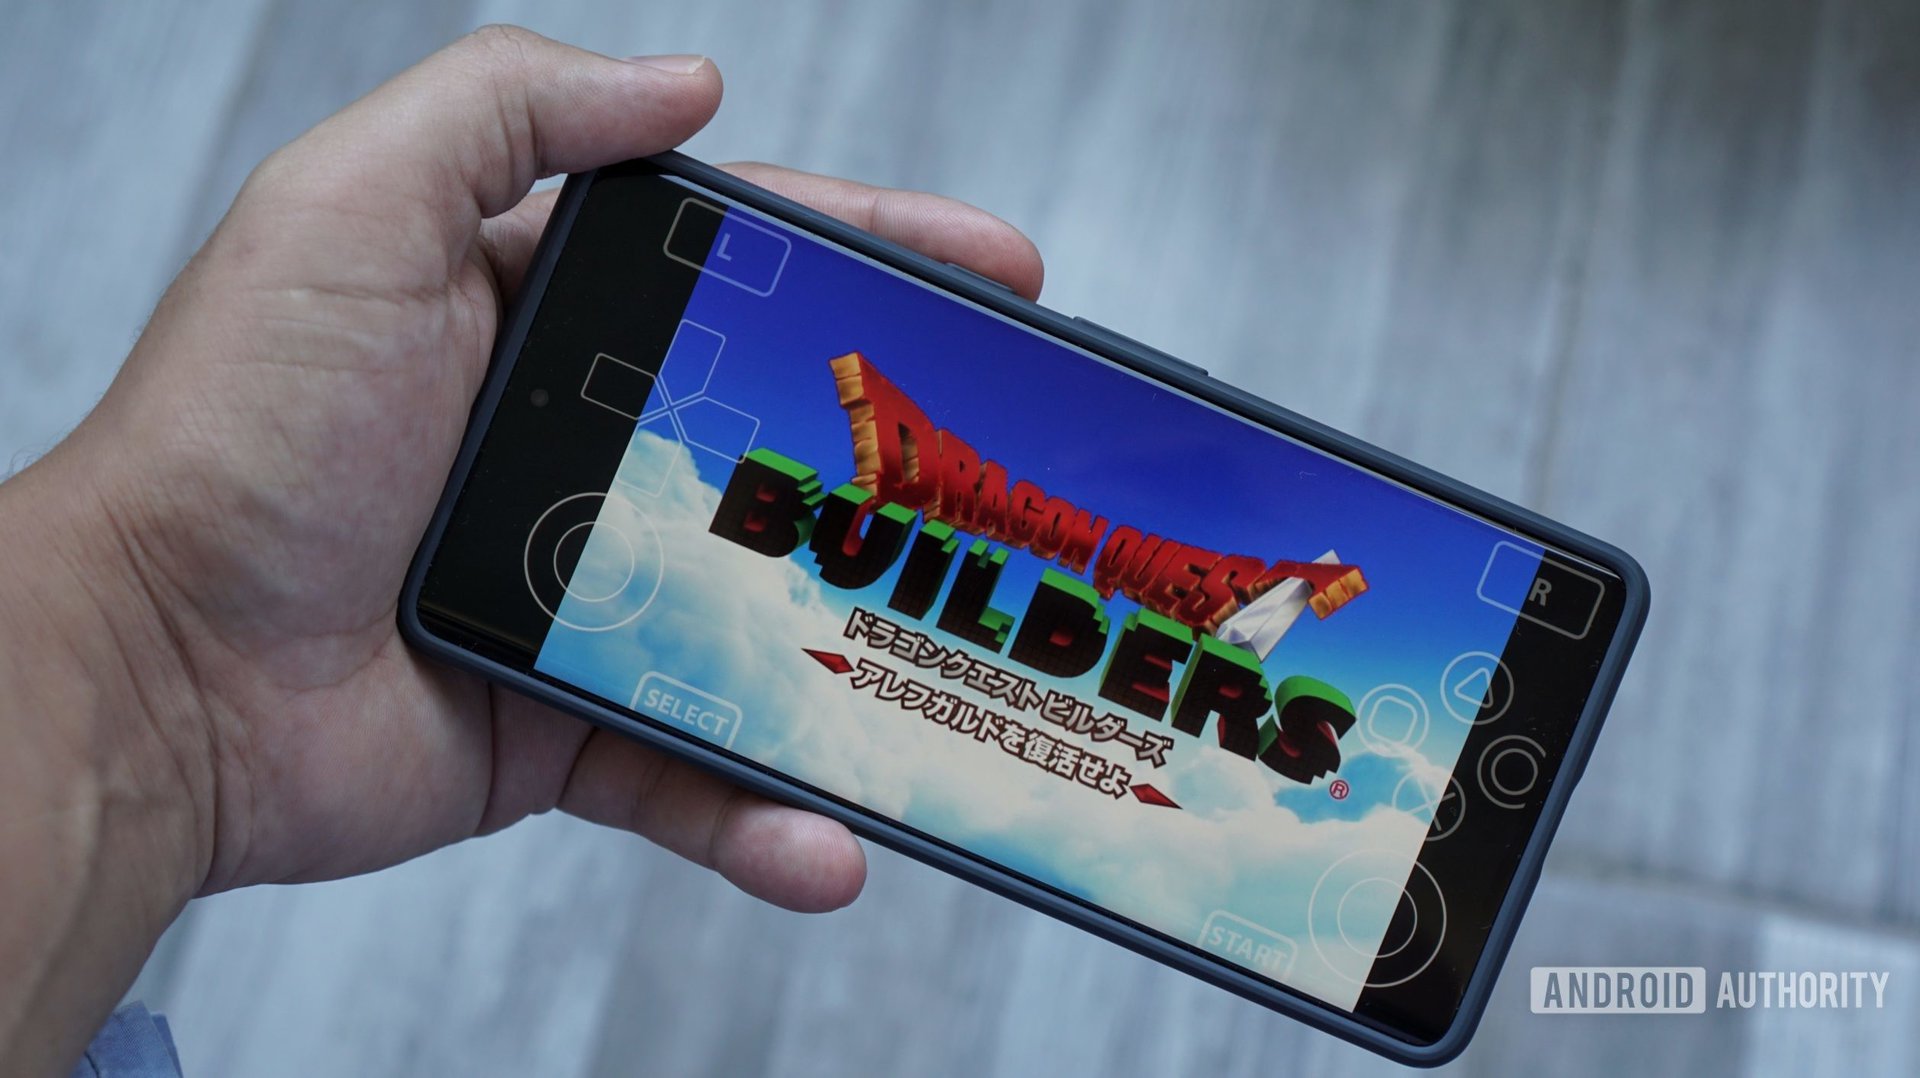 Play Windows PC games on your Android phone for free using Winlator 3